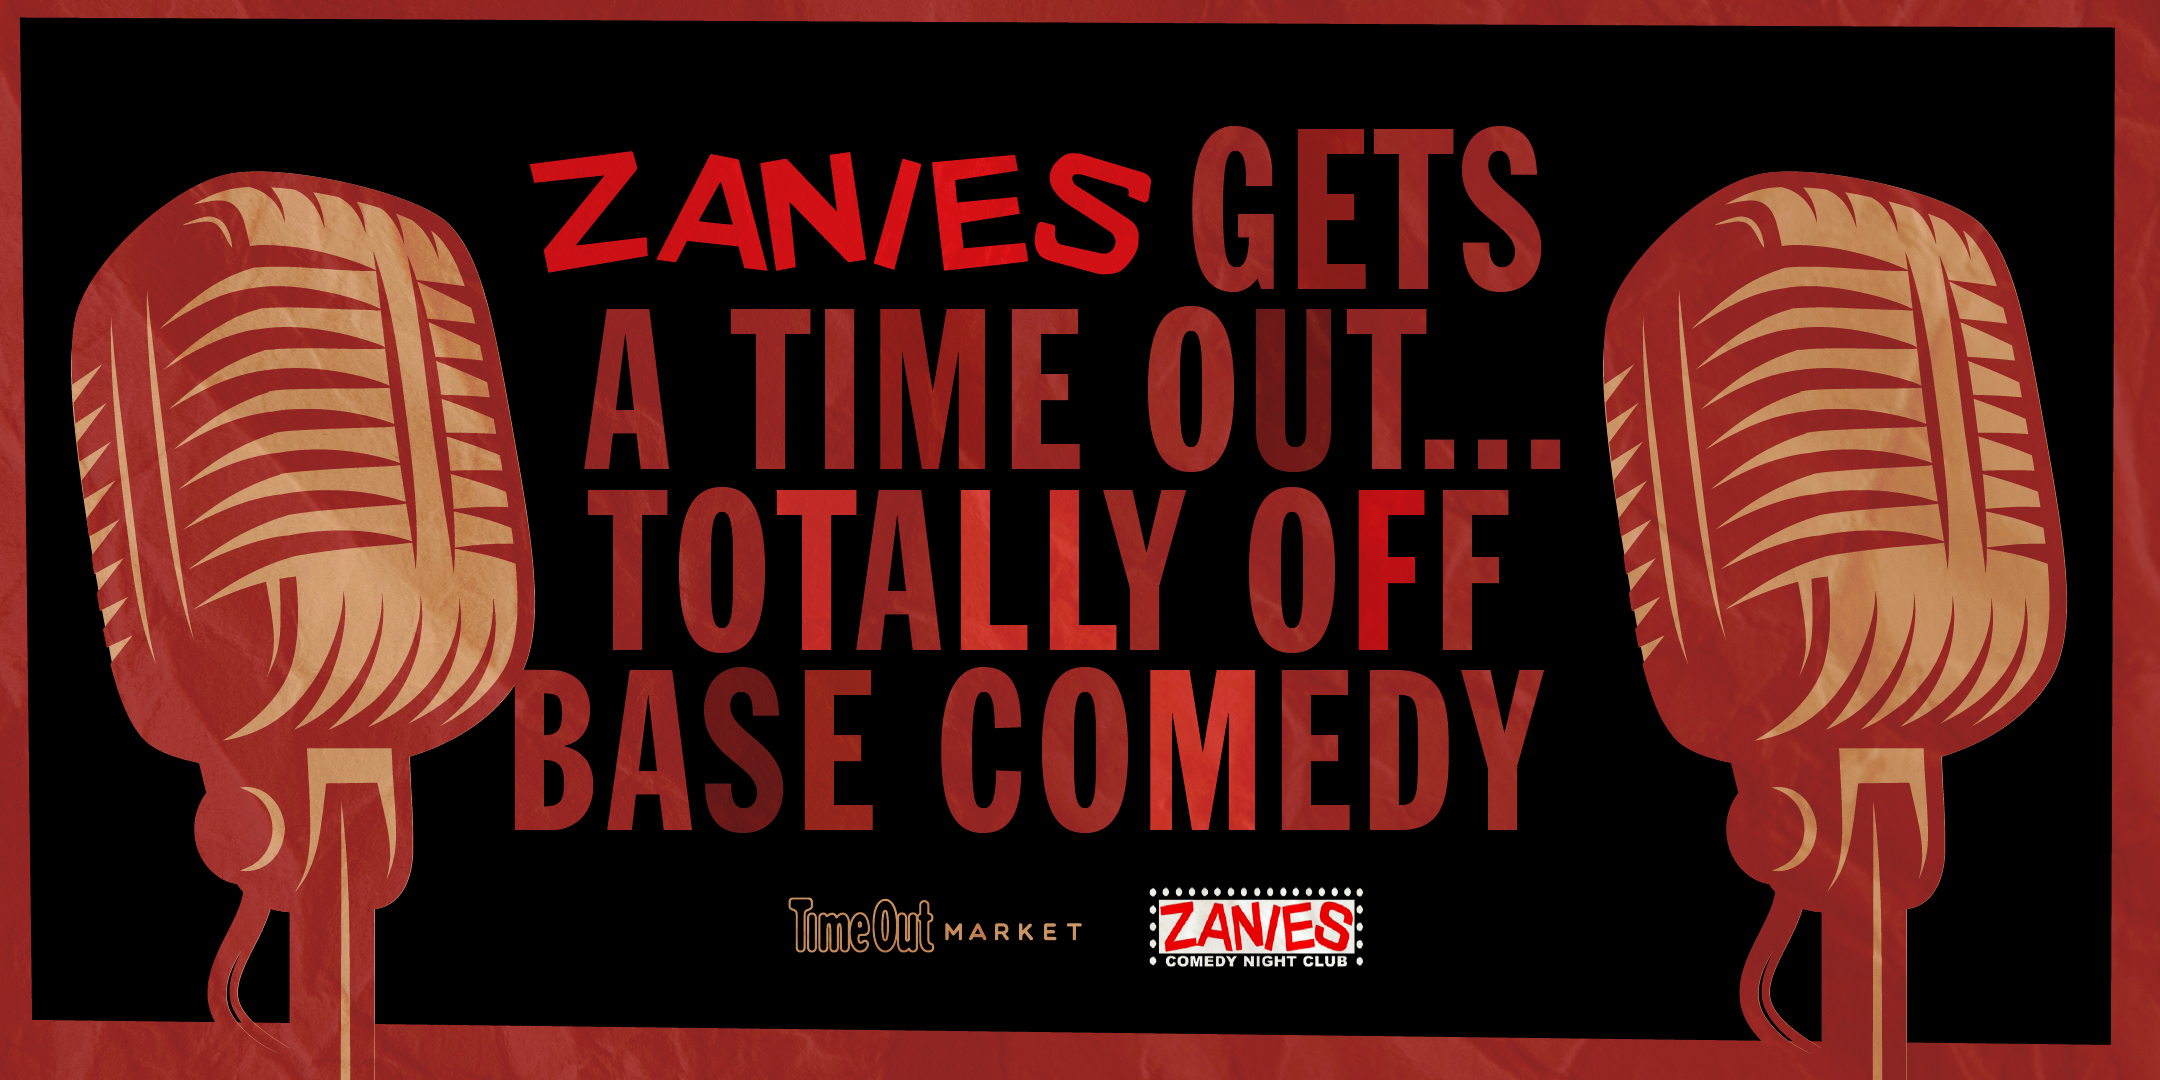 Zanies Gets a Time Out….Totally Off Base Comedy